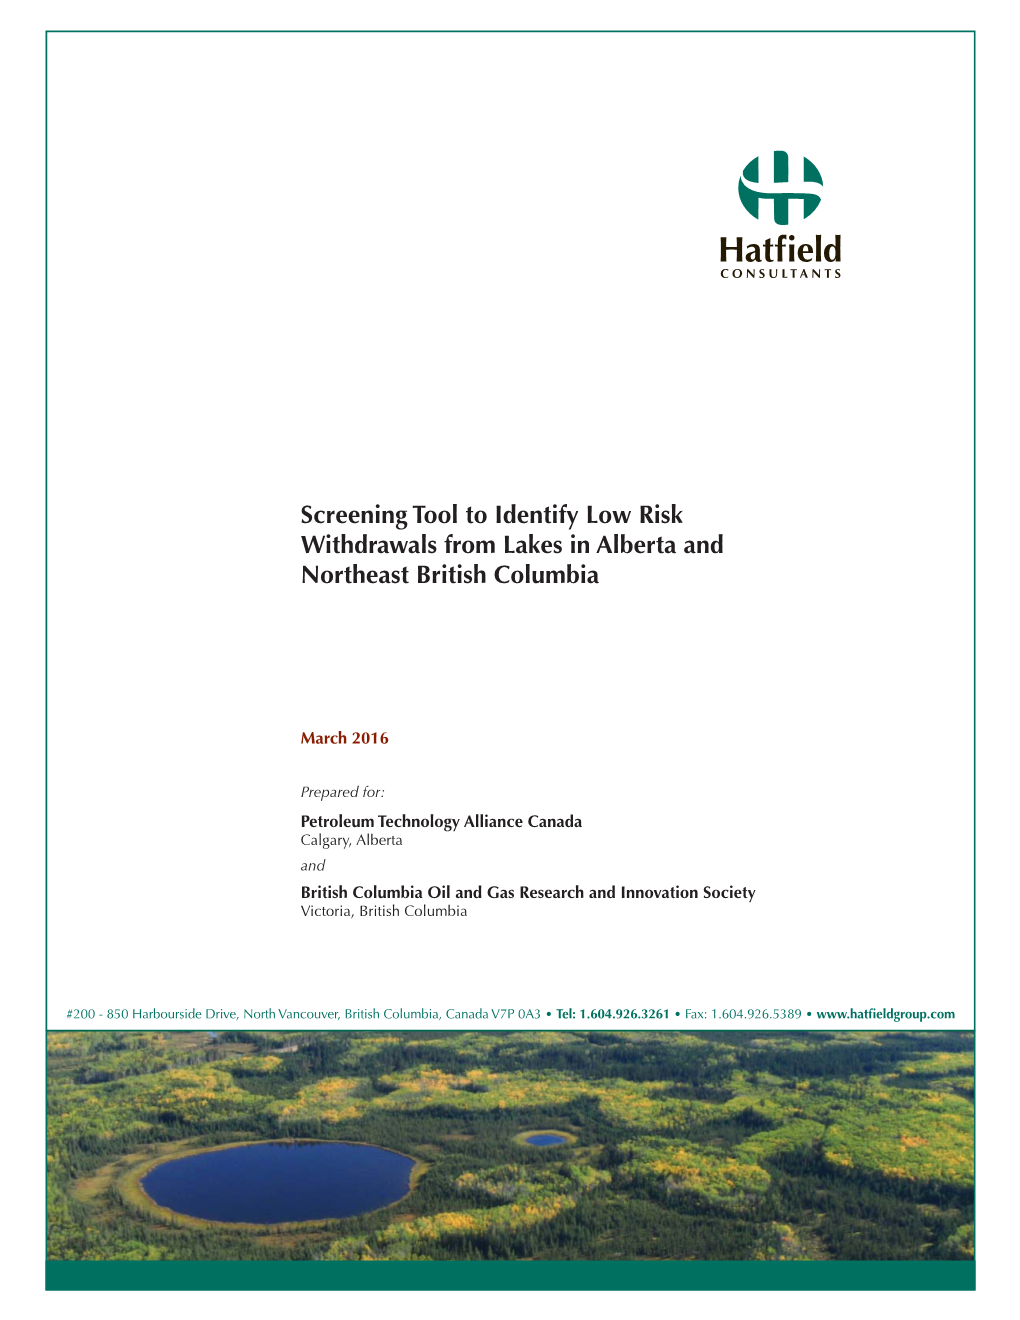 Screening Tool to Identify Lower Risk Withdrawals from Lakes in Alberta and Northeast BC